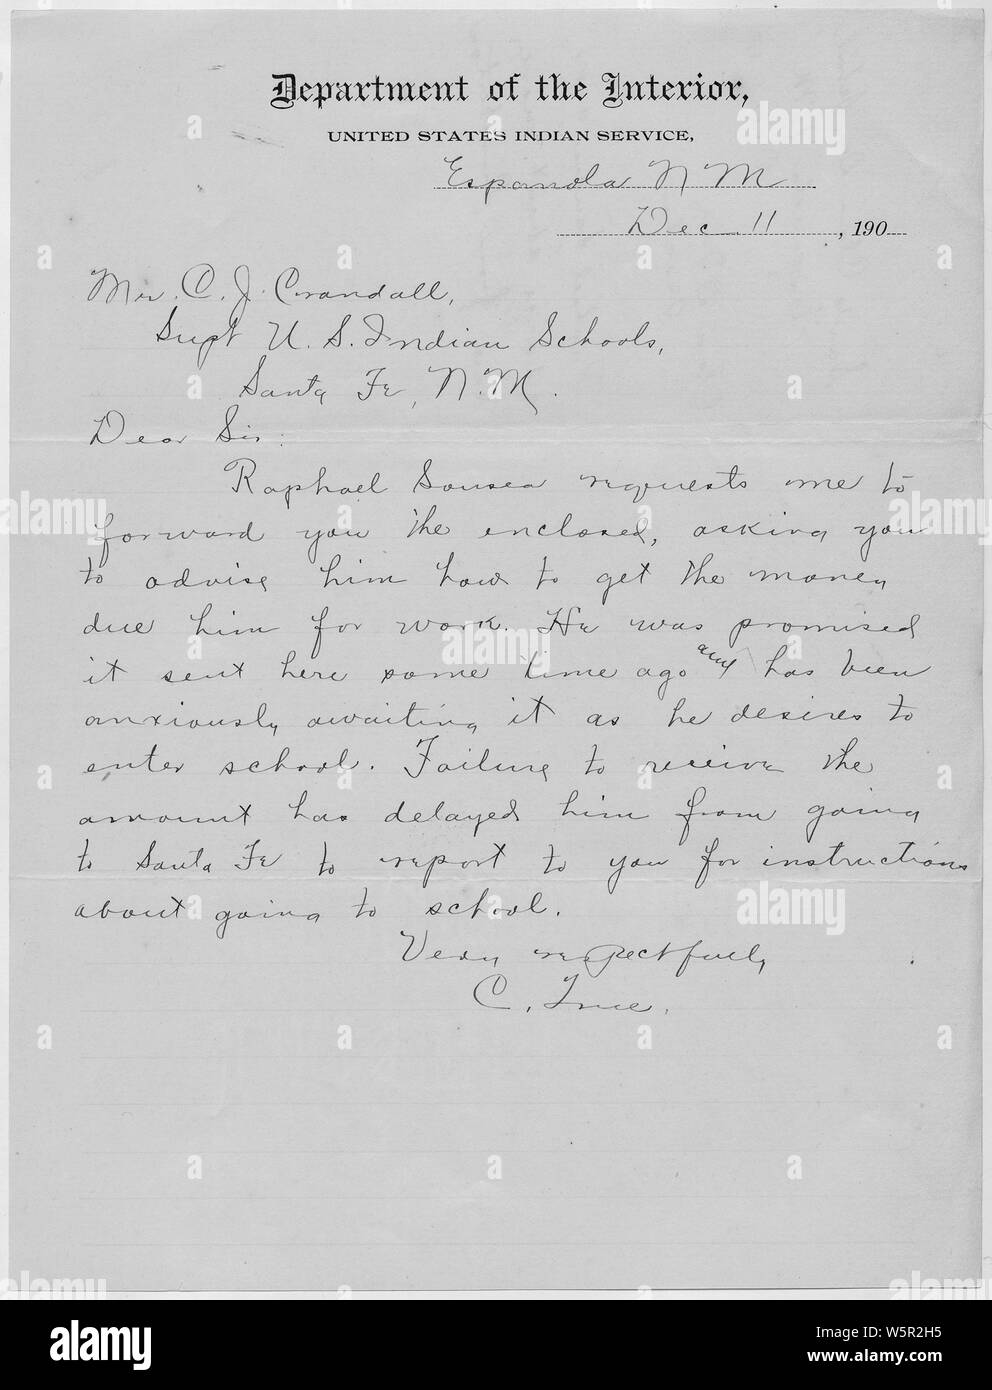 Letter to Superintendent concerning monies owed to Raphael Sousea in order to go to school.; Scope and content:  Letter to Supt. Crandall from Miss True who is writing for Raphael Sousea requesting monies he was promised so that he can go to school in Santa Fe. Stock Photo